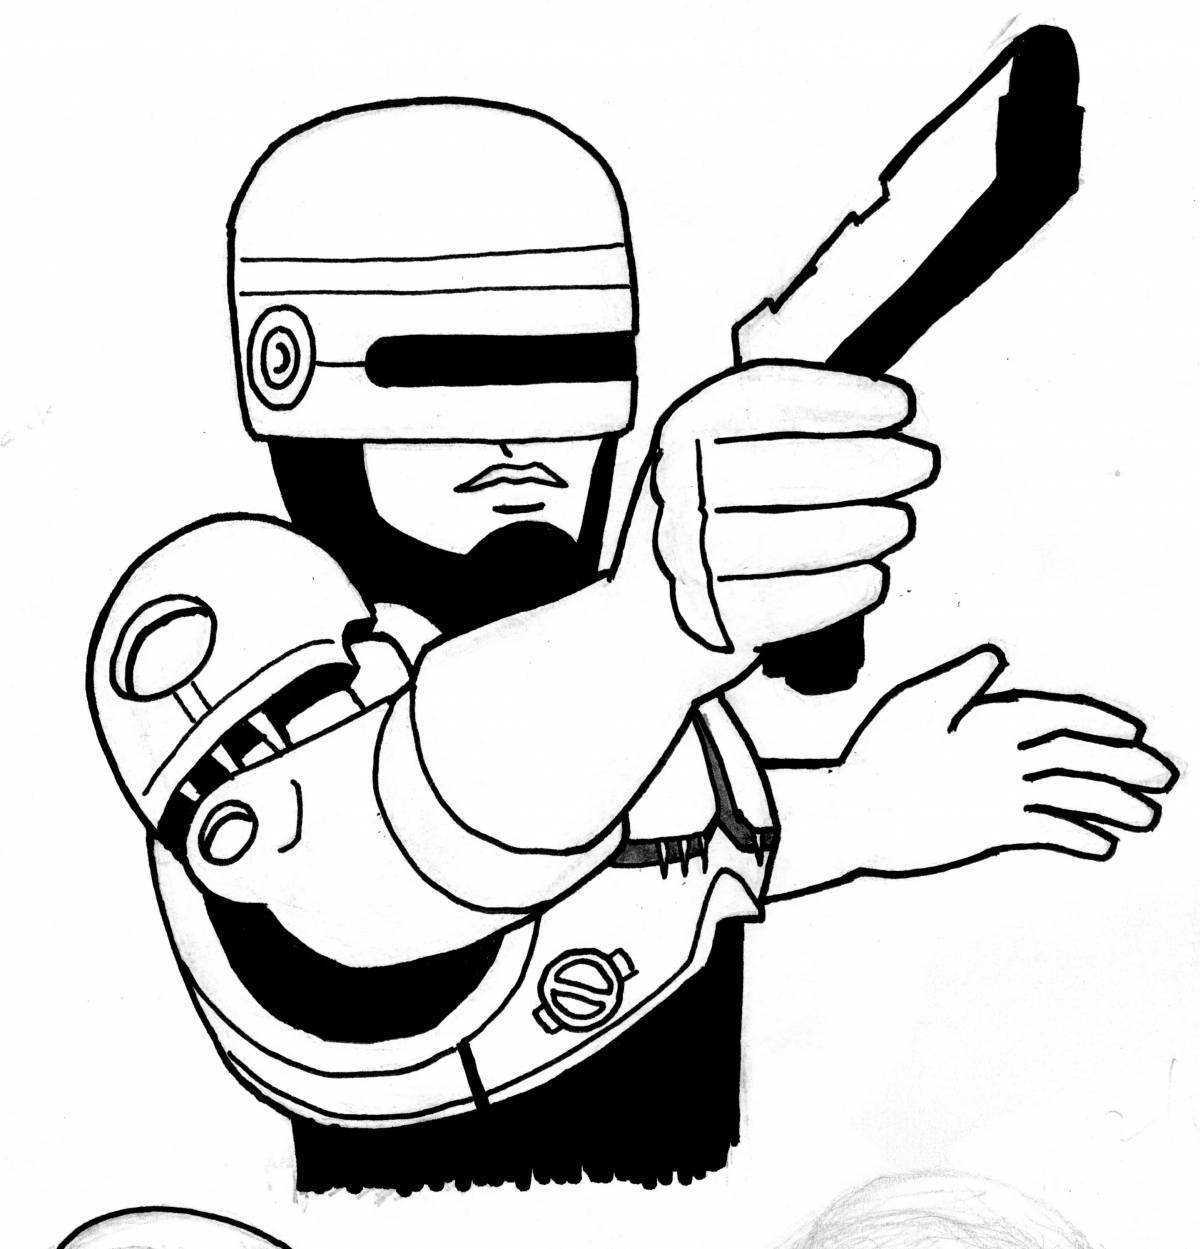 Colorful police robot coloring book for kids